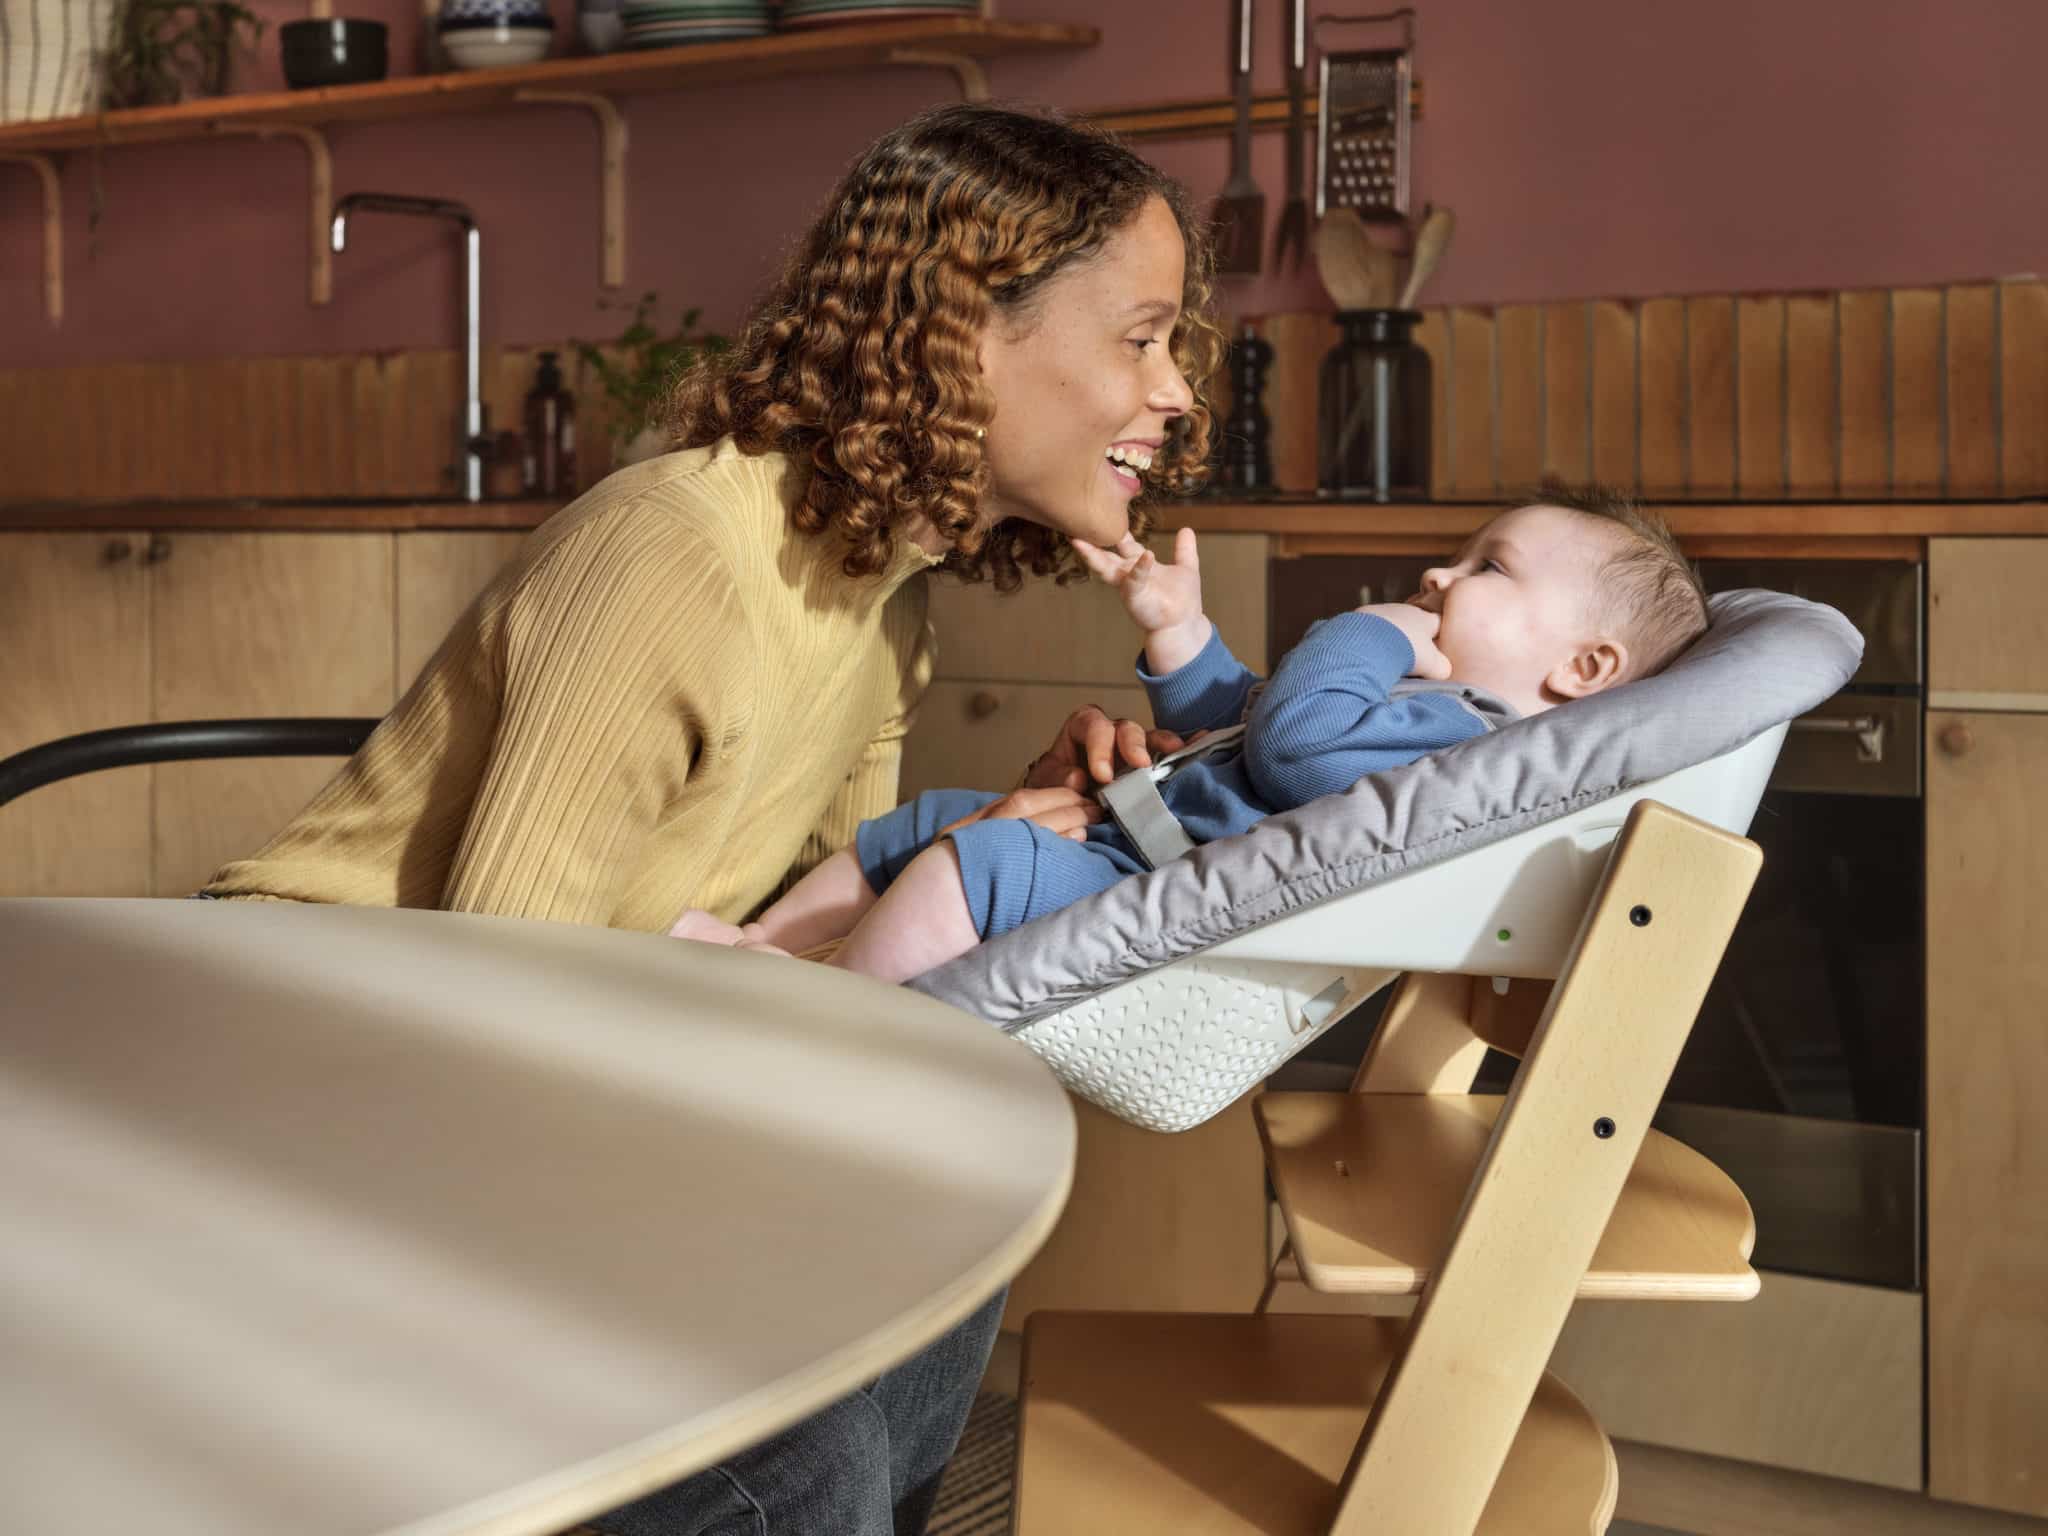 Stokke Brand Roommate Lifestyle In Setting